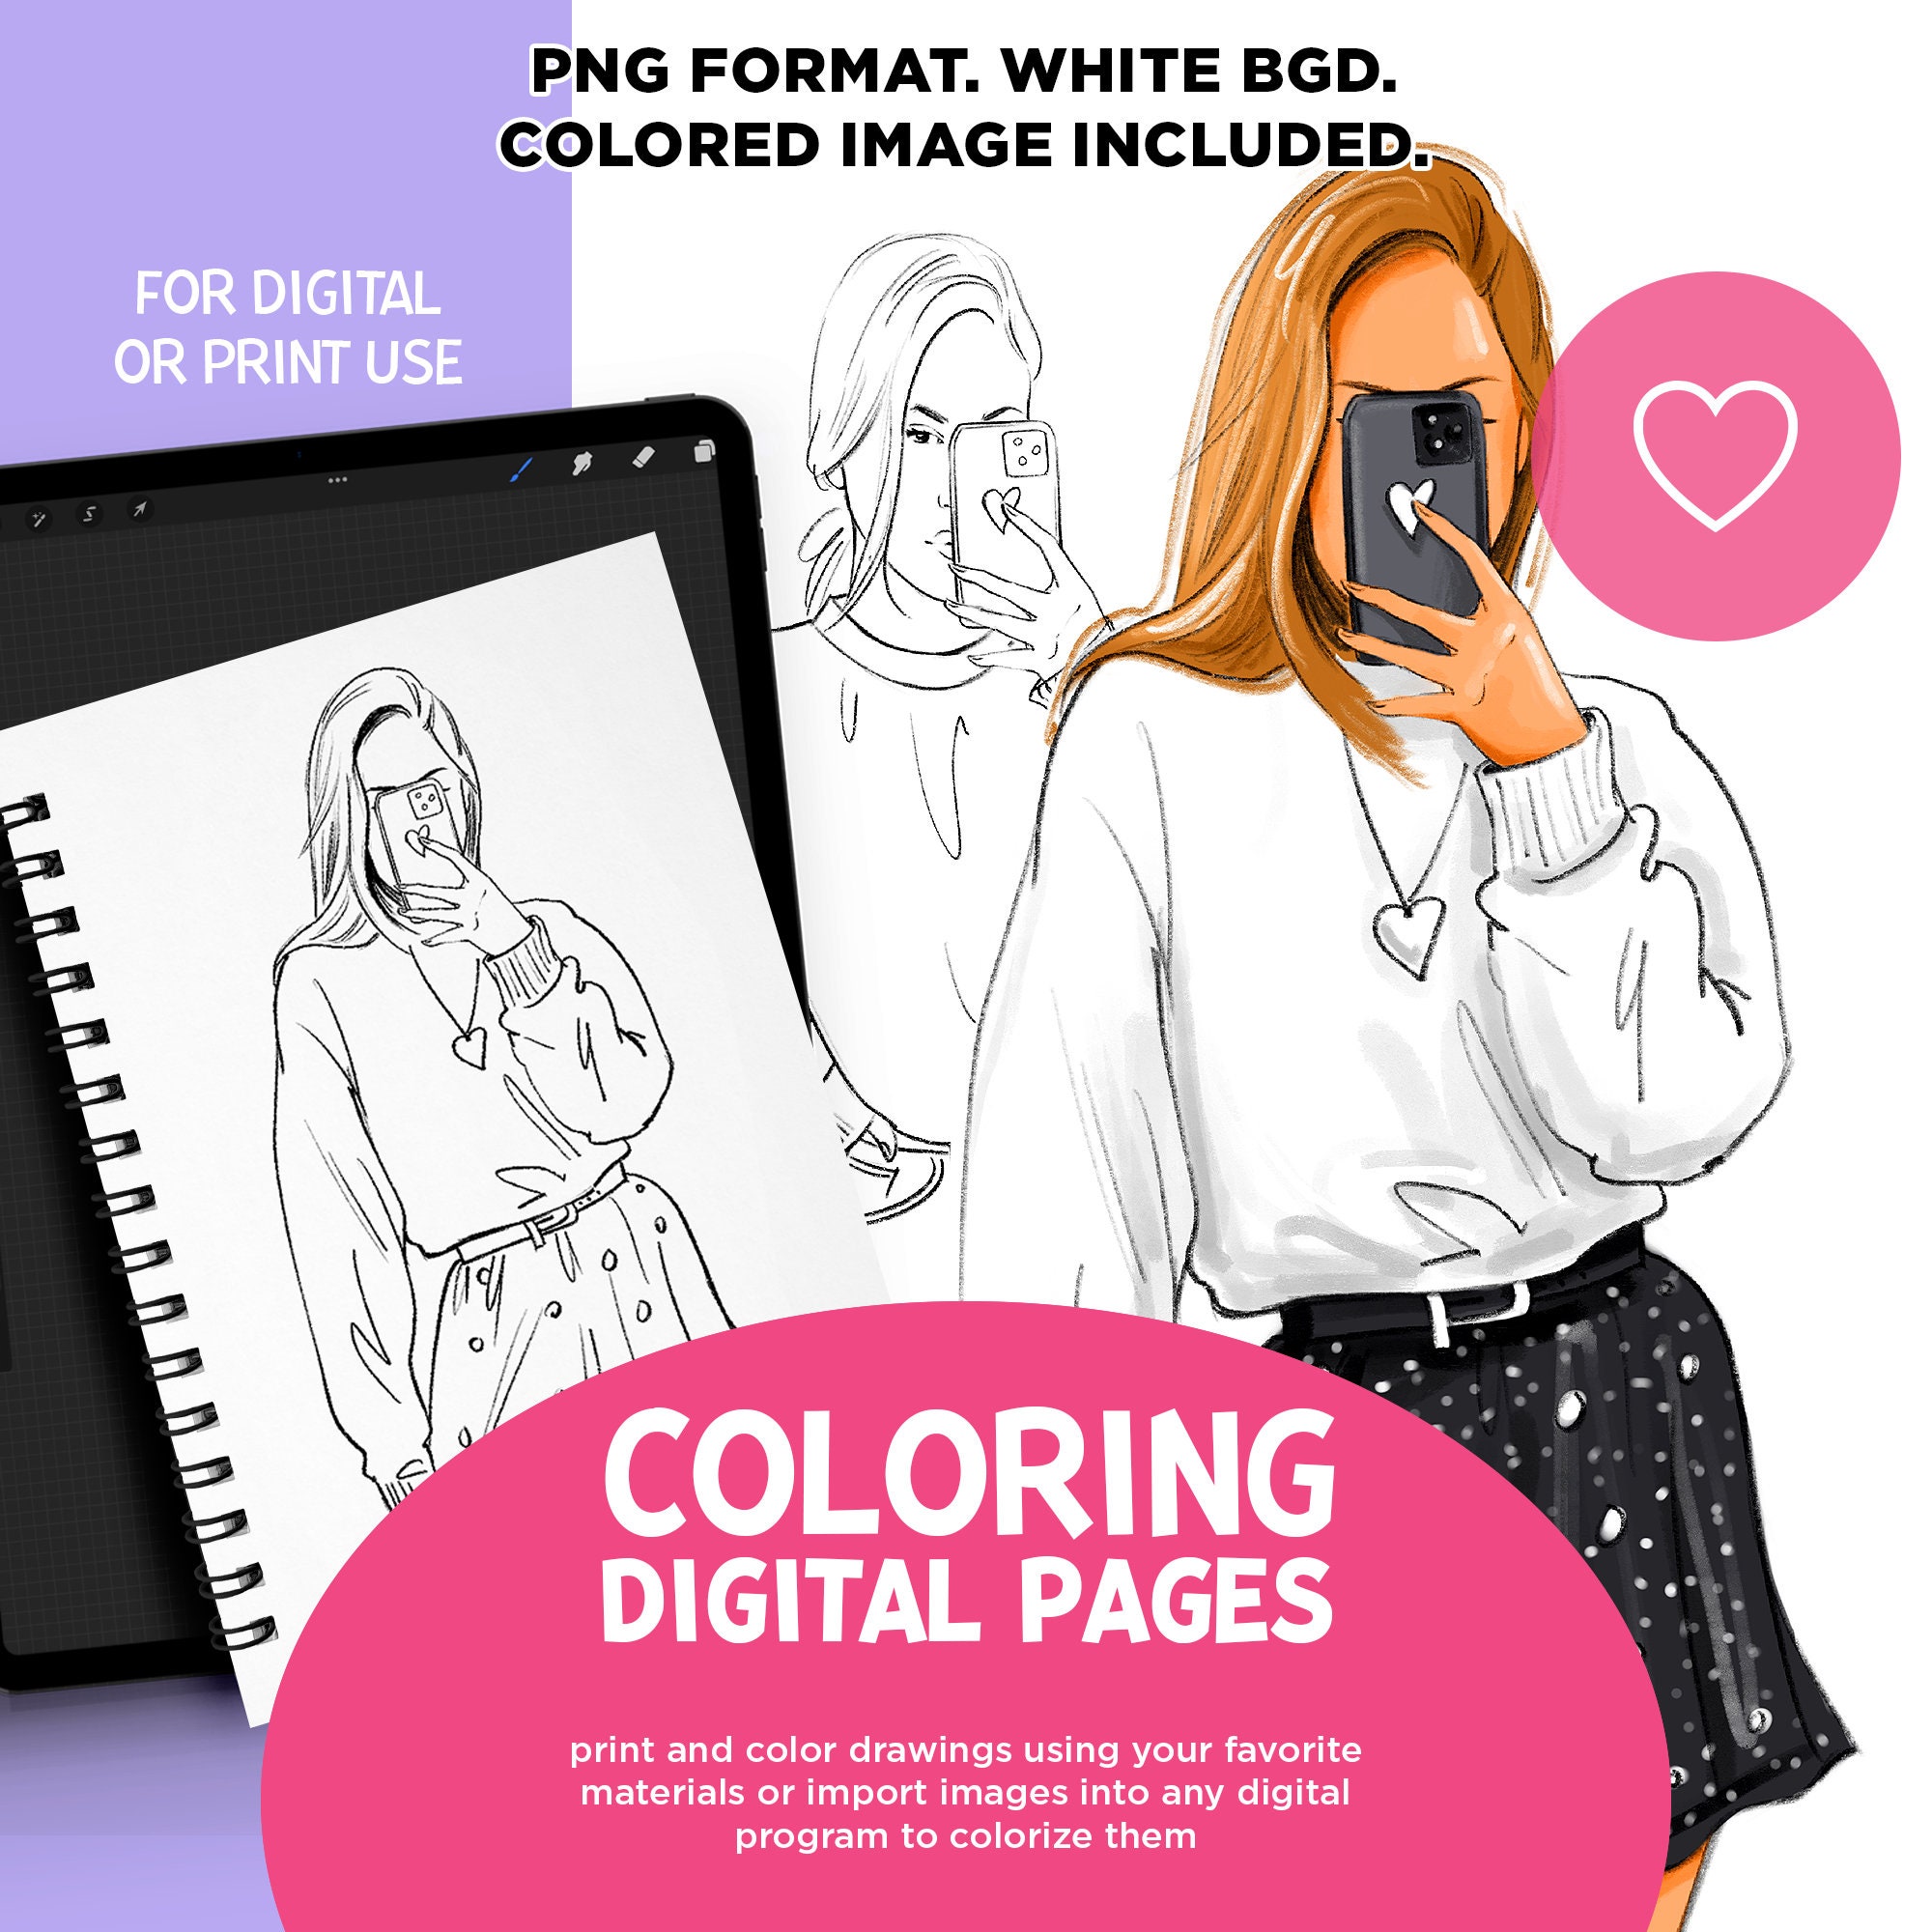 Fashion Coloring Book: women faces coloring book, 300 Fun Coloring Pages  For Adult, women, For anyone who loves Fashion and dresses (Paperback)